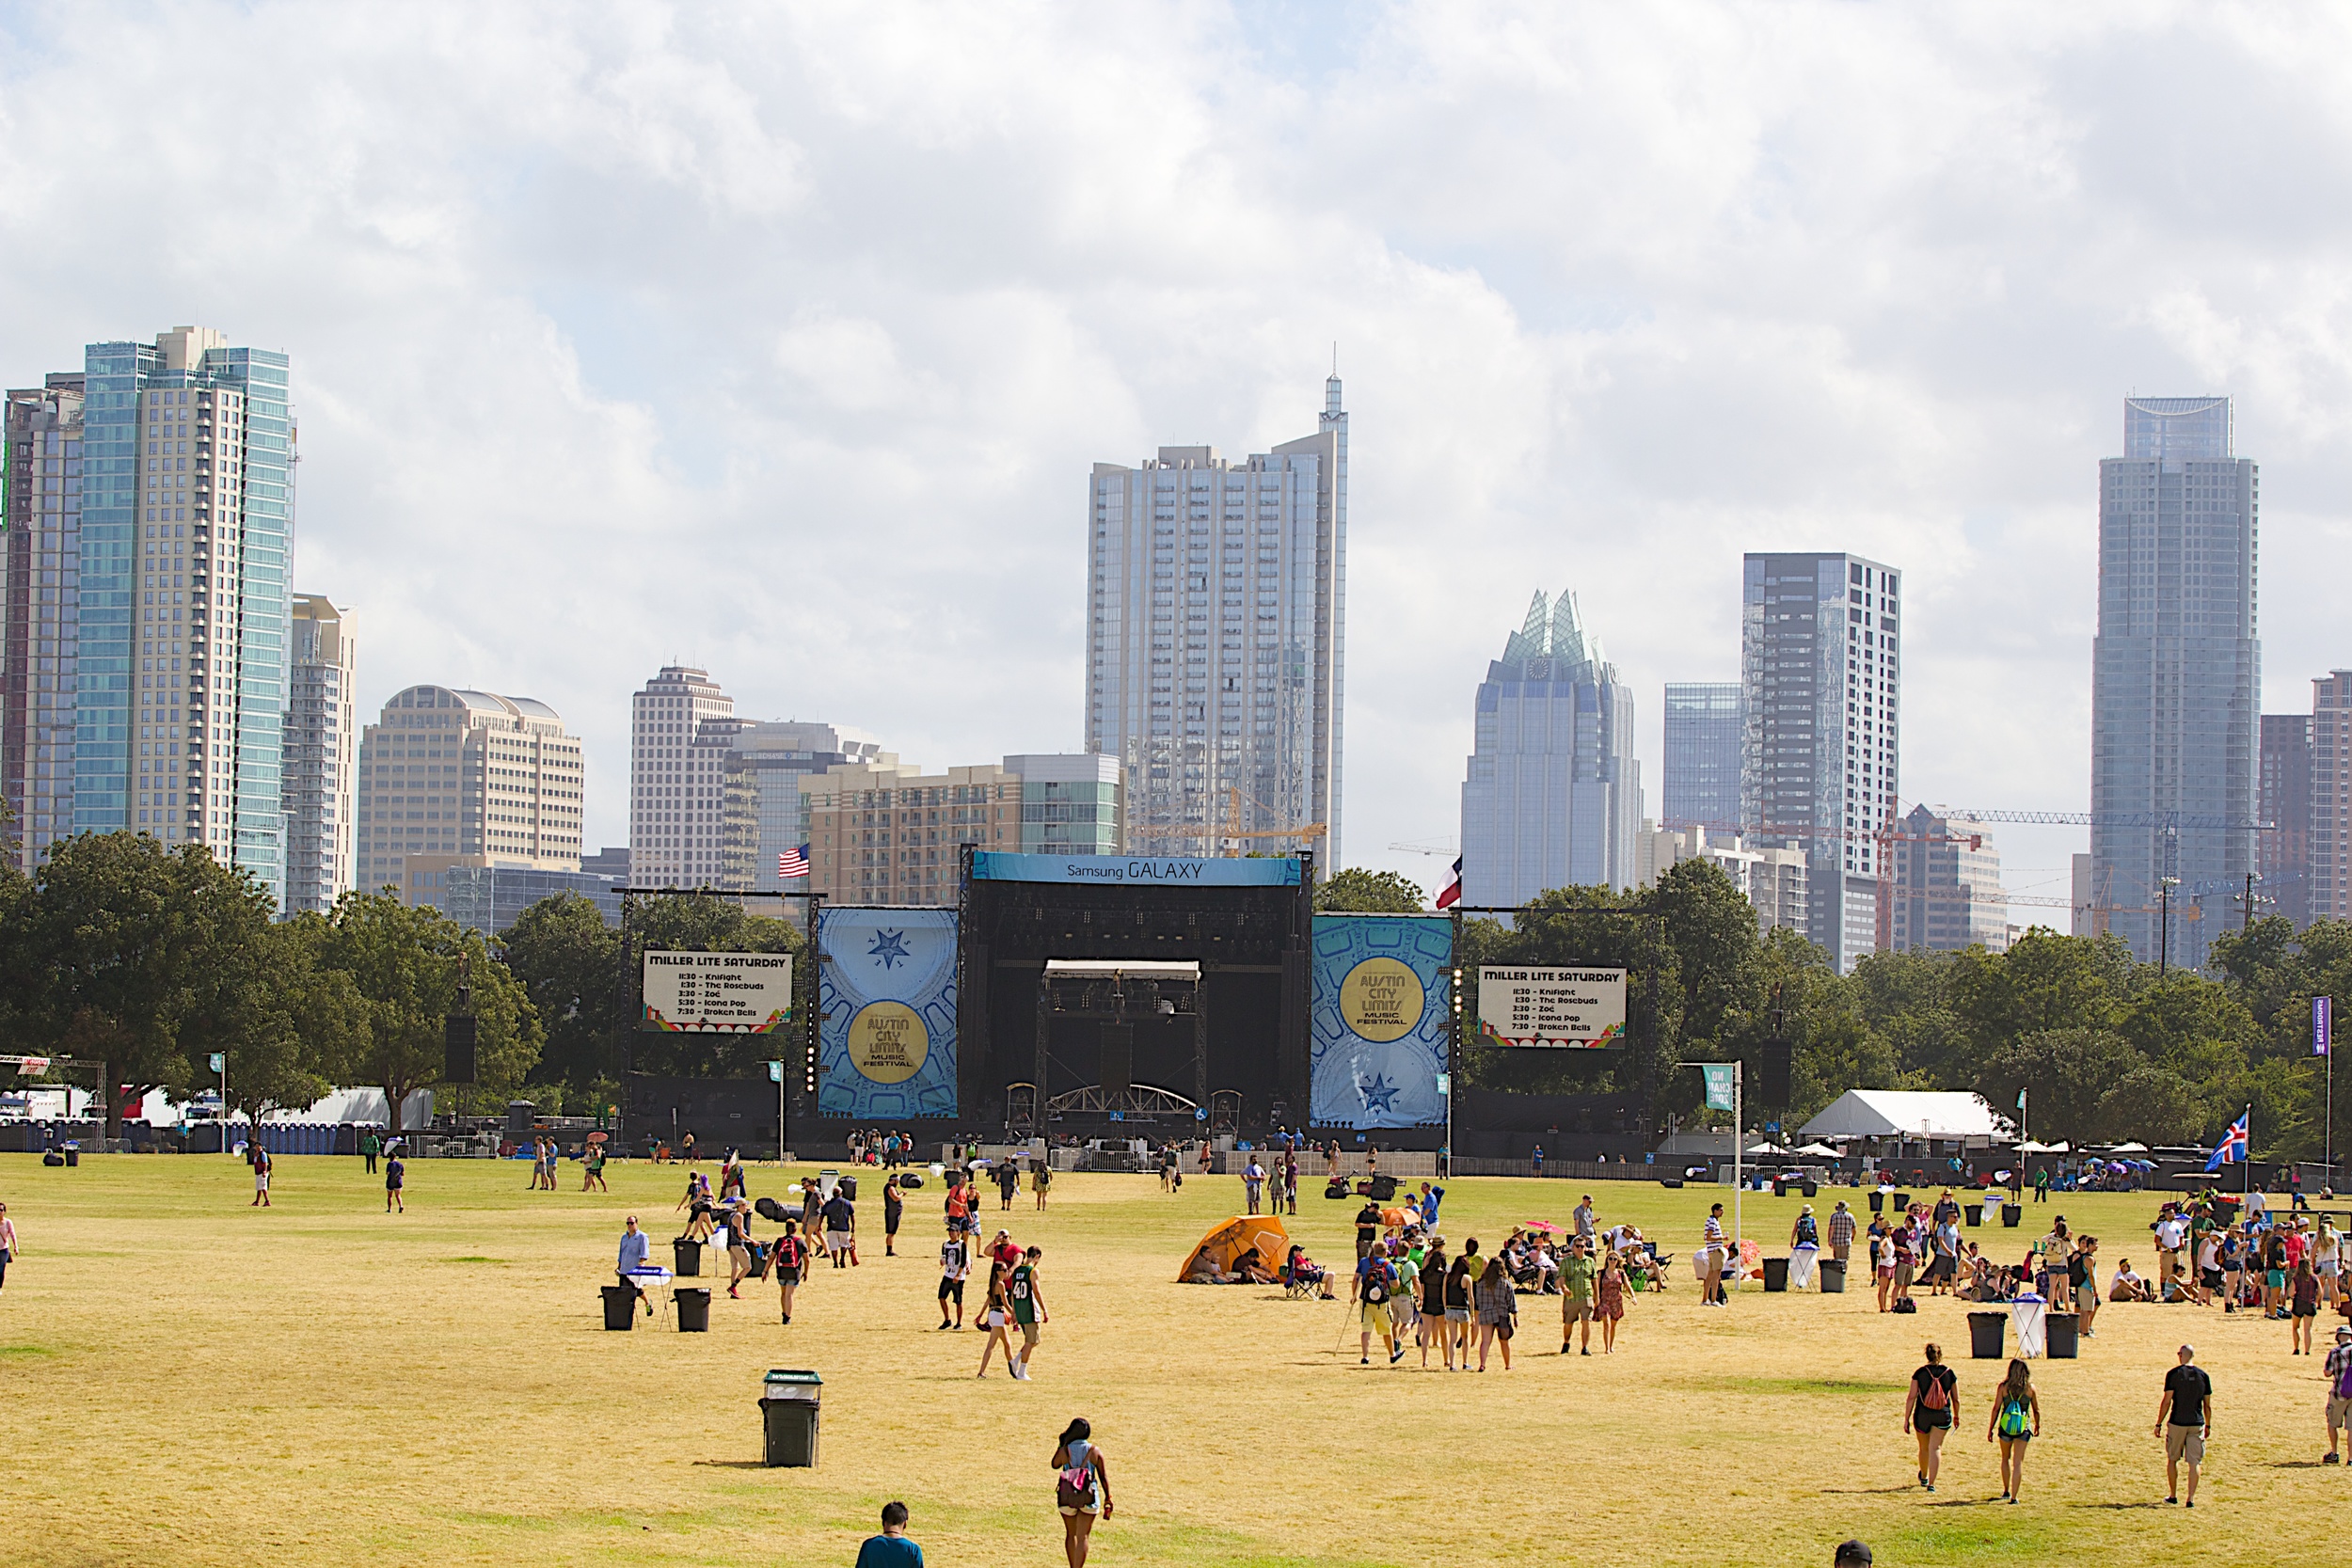 acl_day1_002.jpg